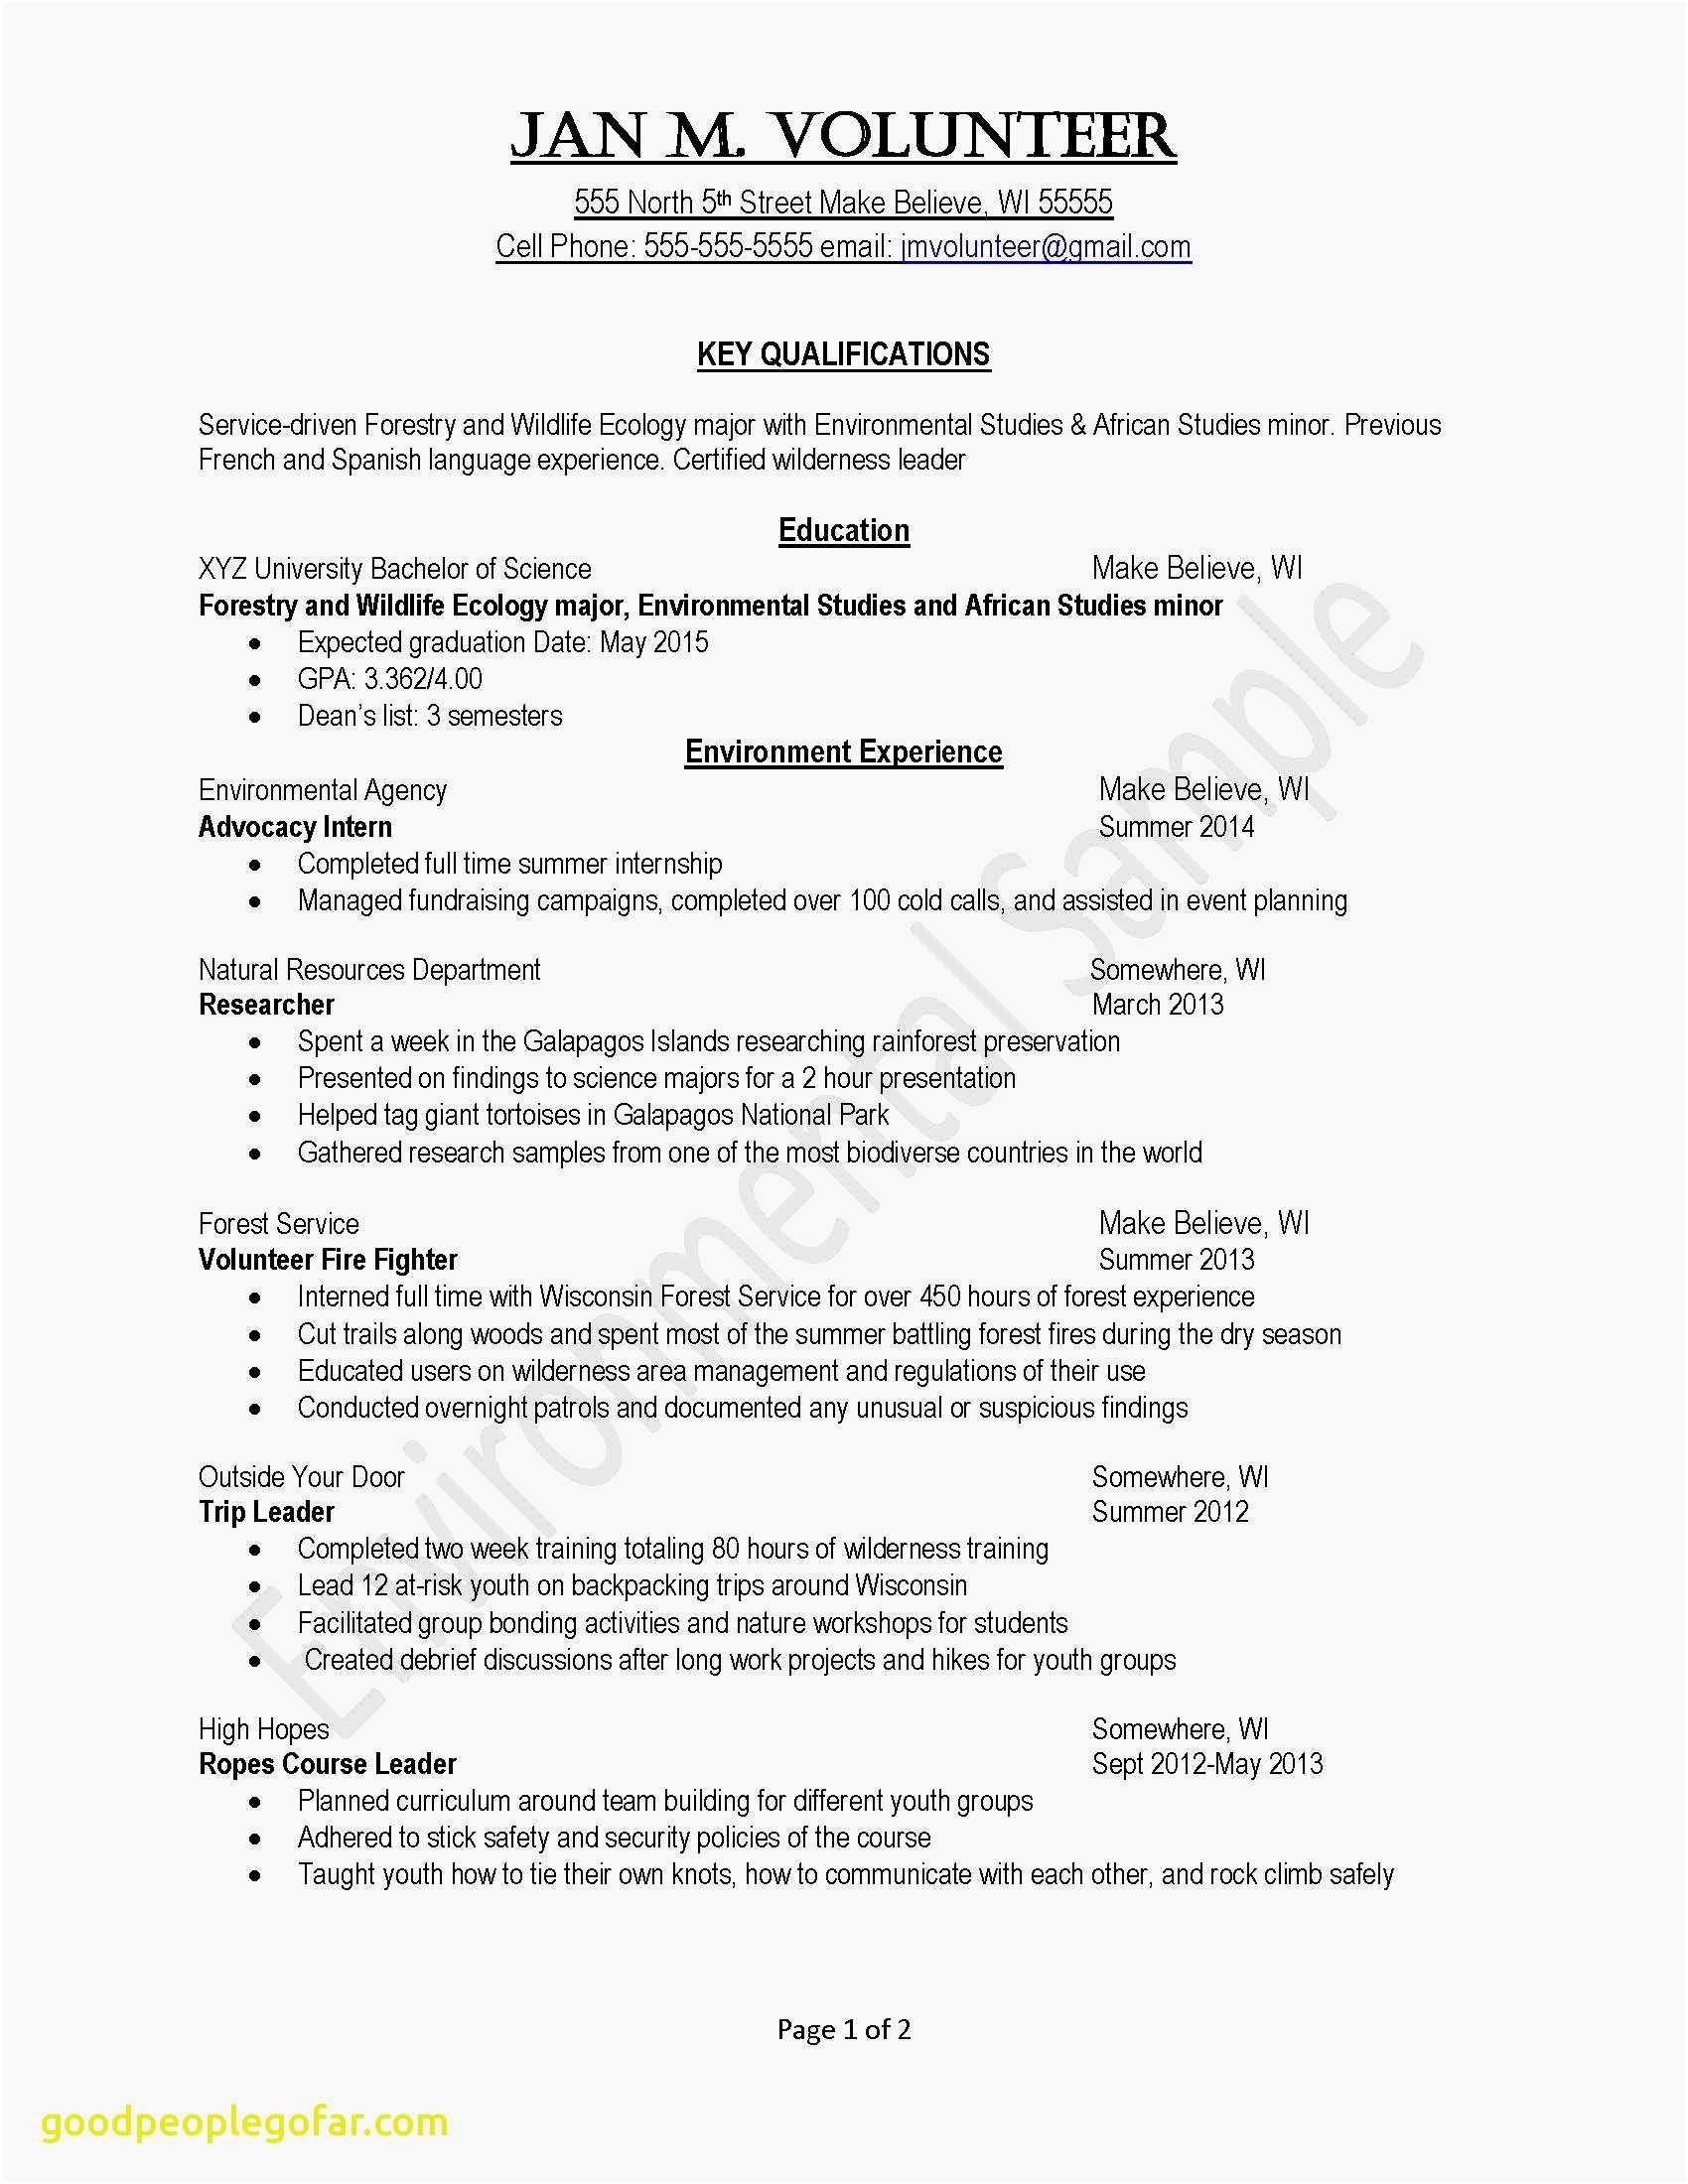 Nhs Letter Of Recommendation Template - Letter or Re Mendation Template Nhs Letter Re Mendation Template